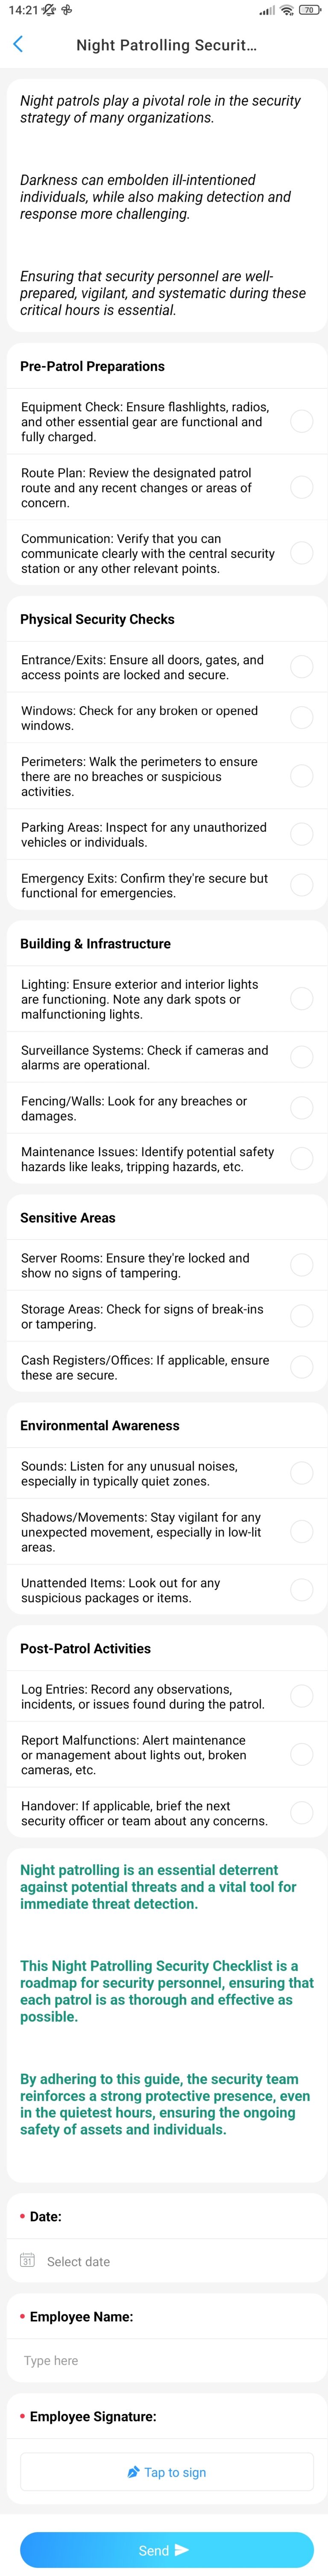 Night Patrolling Security Checklist Template